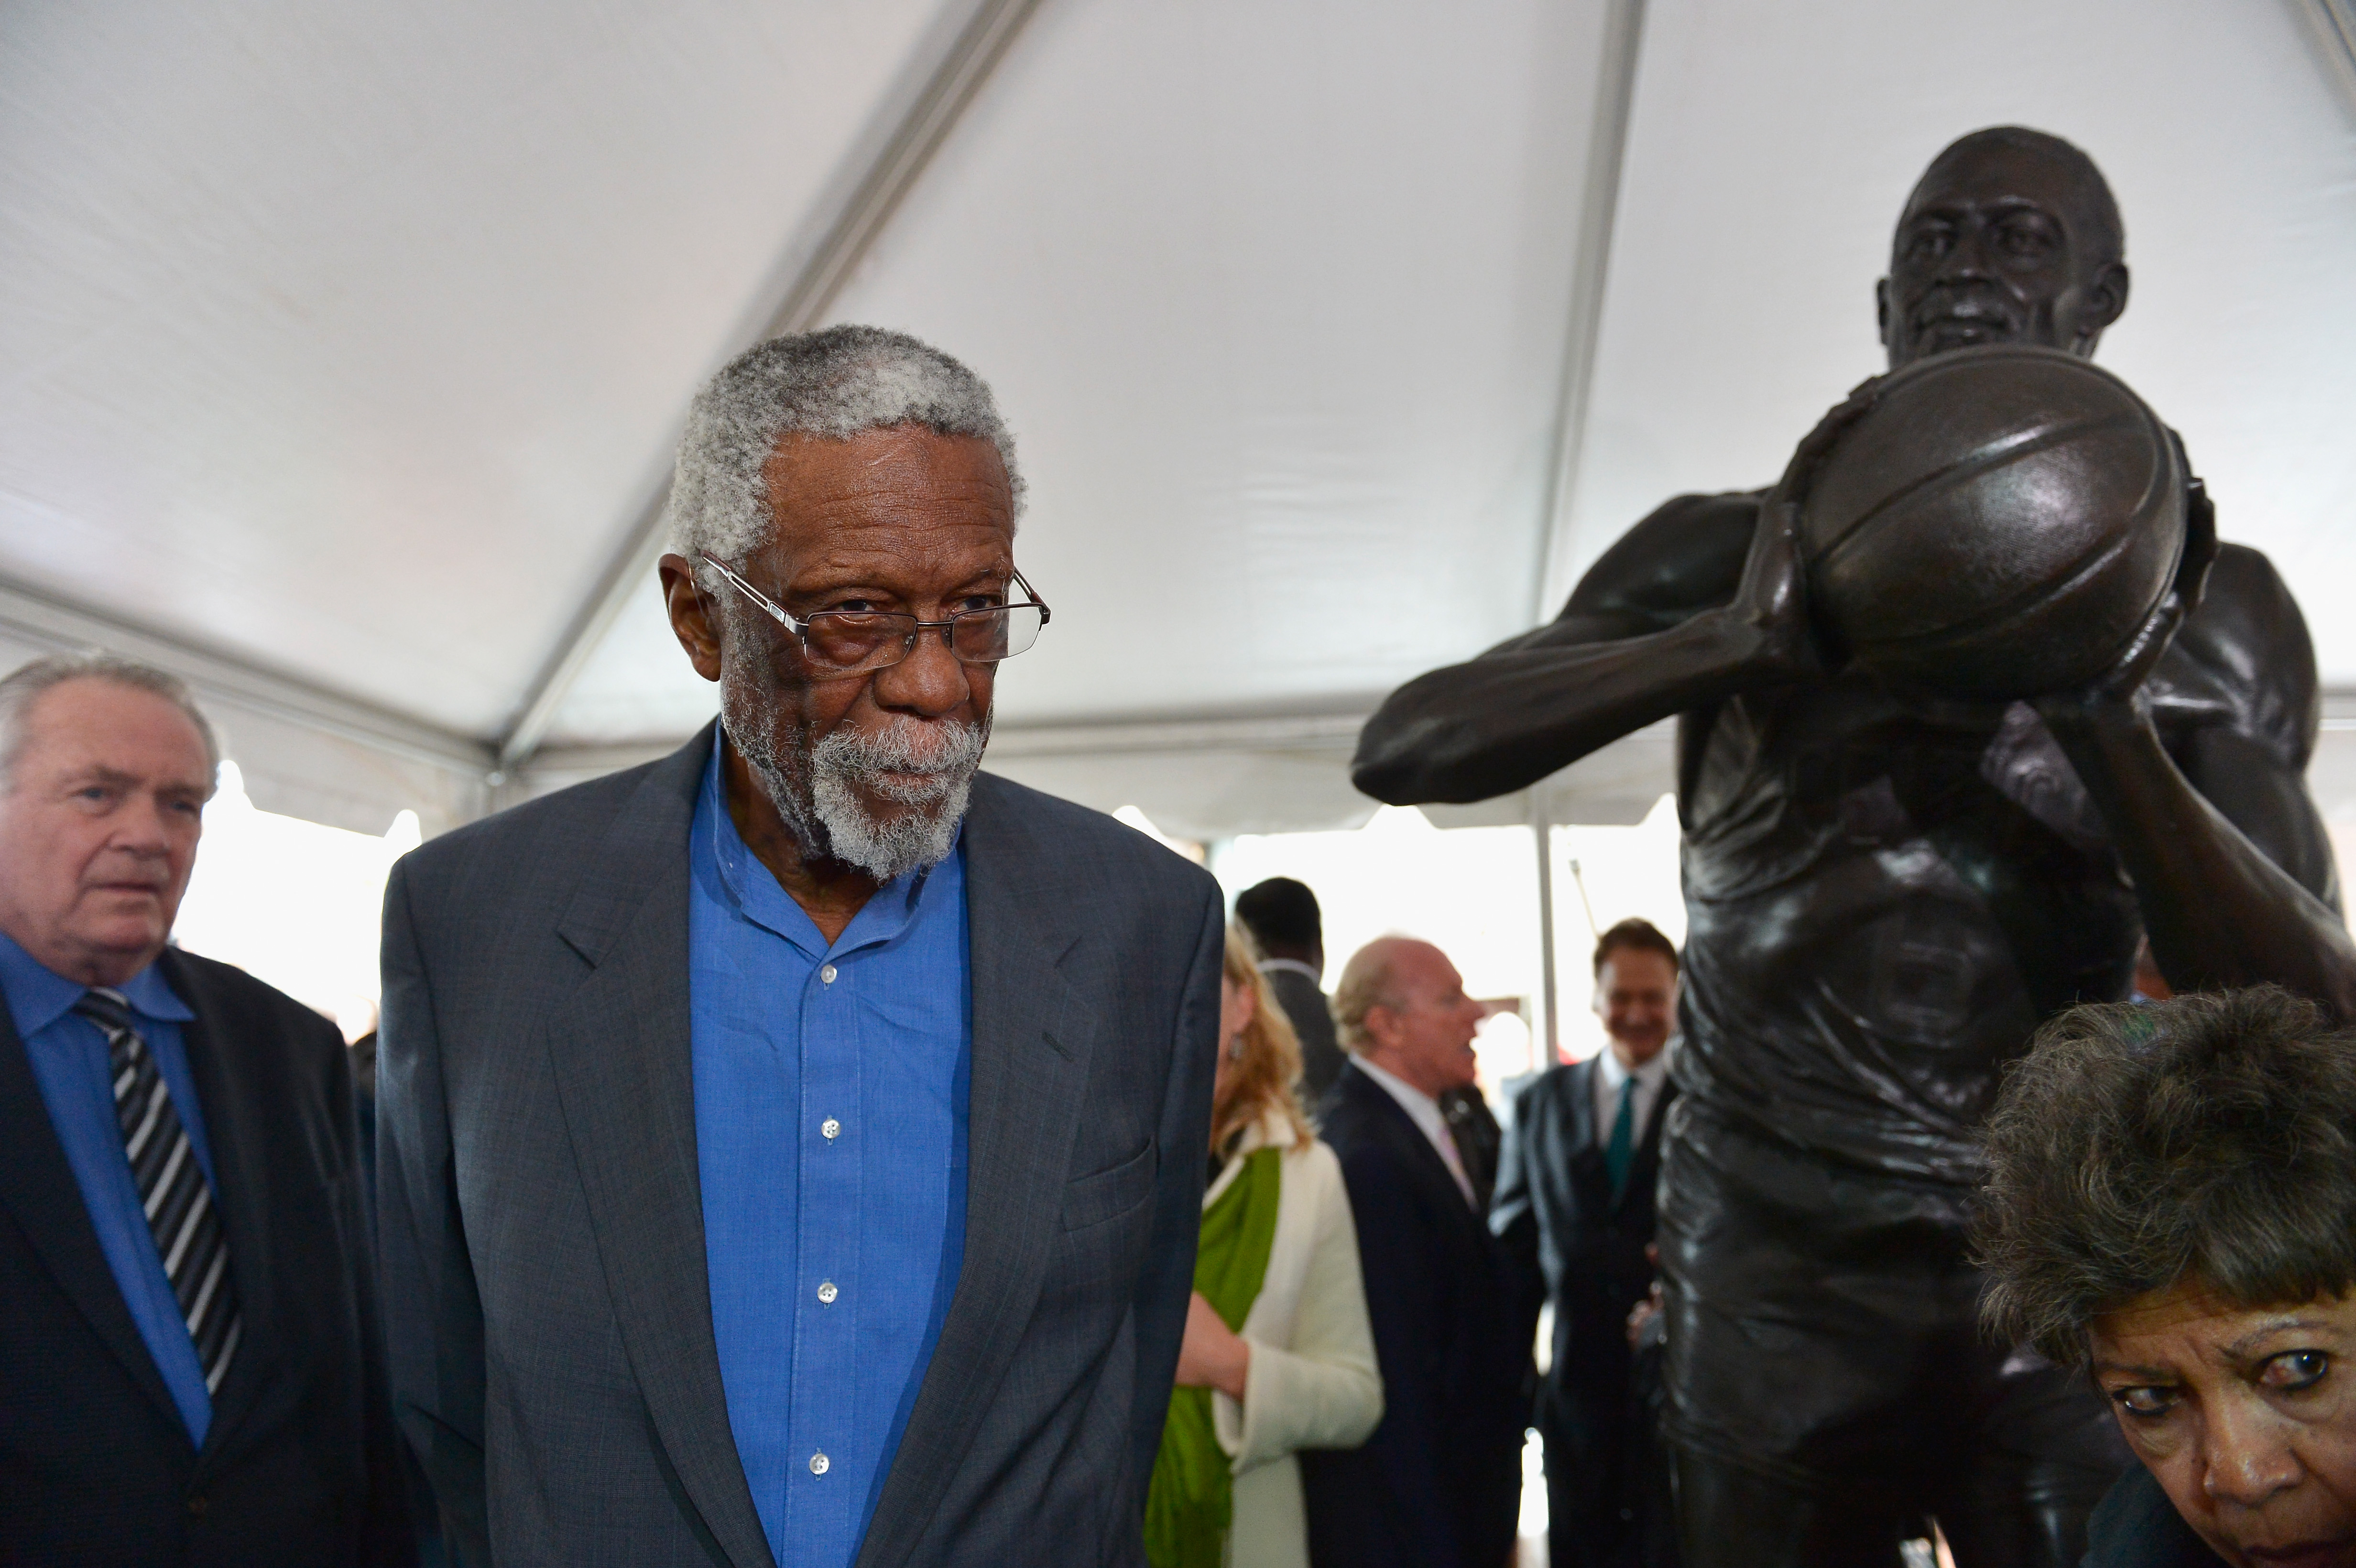 Bill Russell attends the statue unveiling in his honor at Boston City Hall Plaza on November 1, 2013, in Boston, Massachusetts. | Source: Getty Images